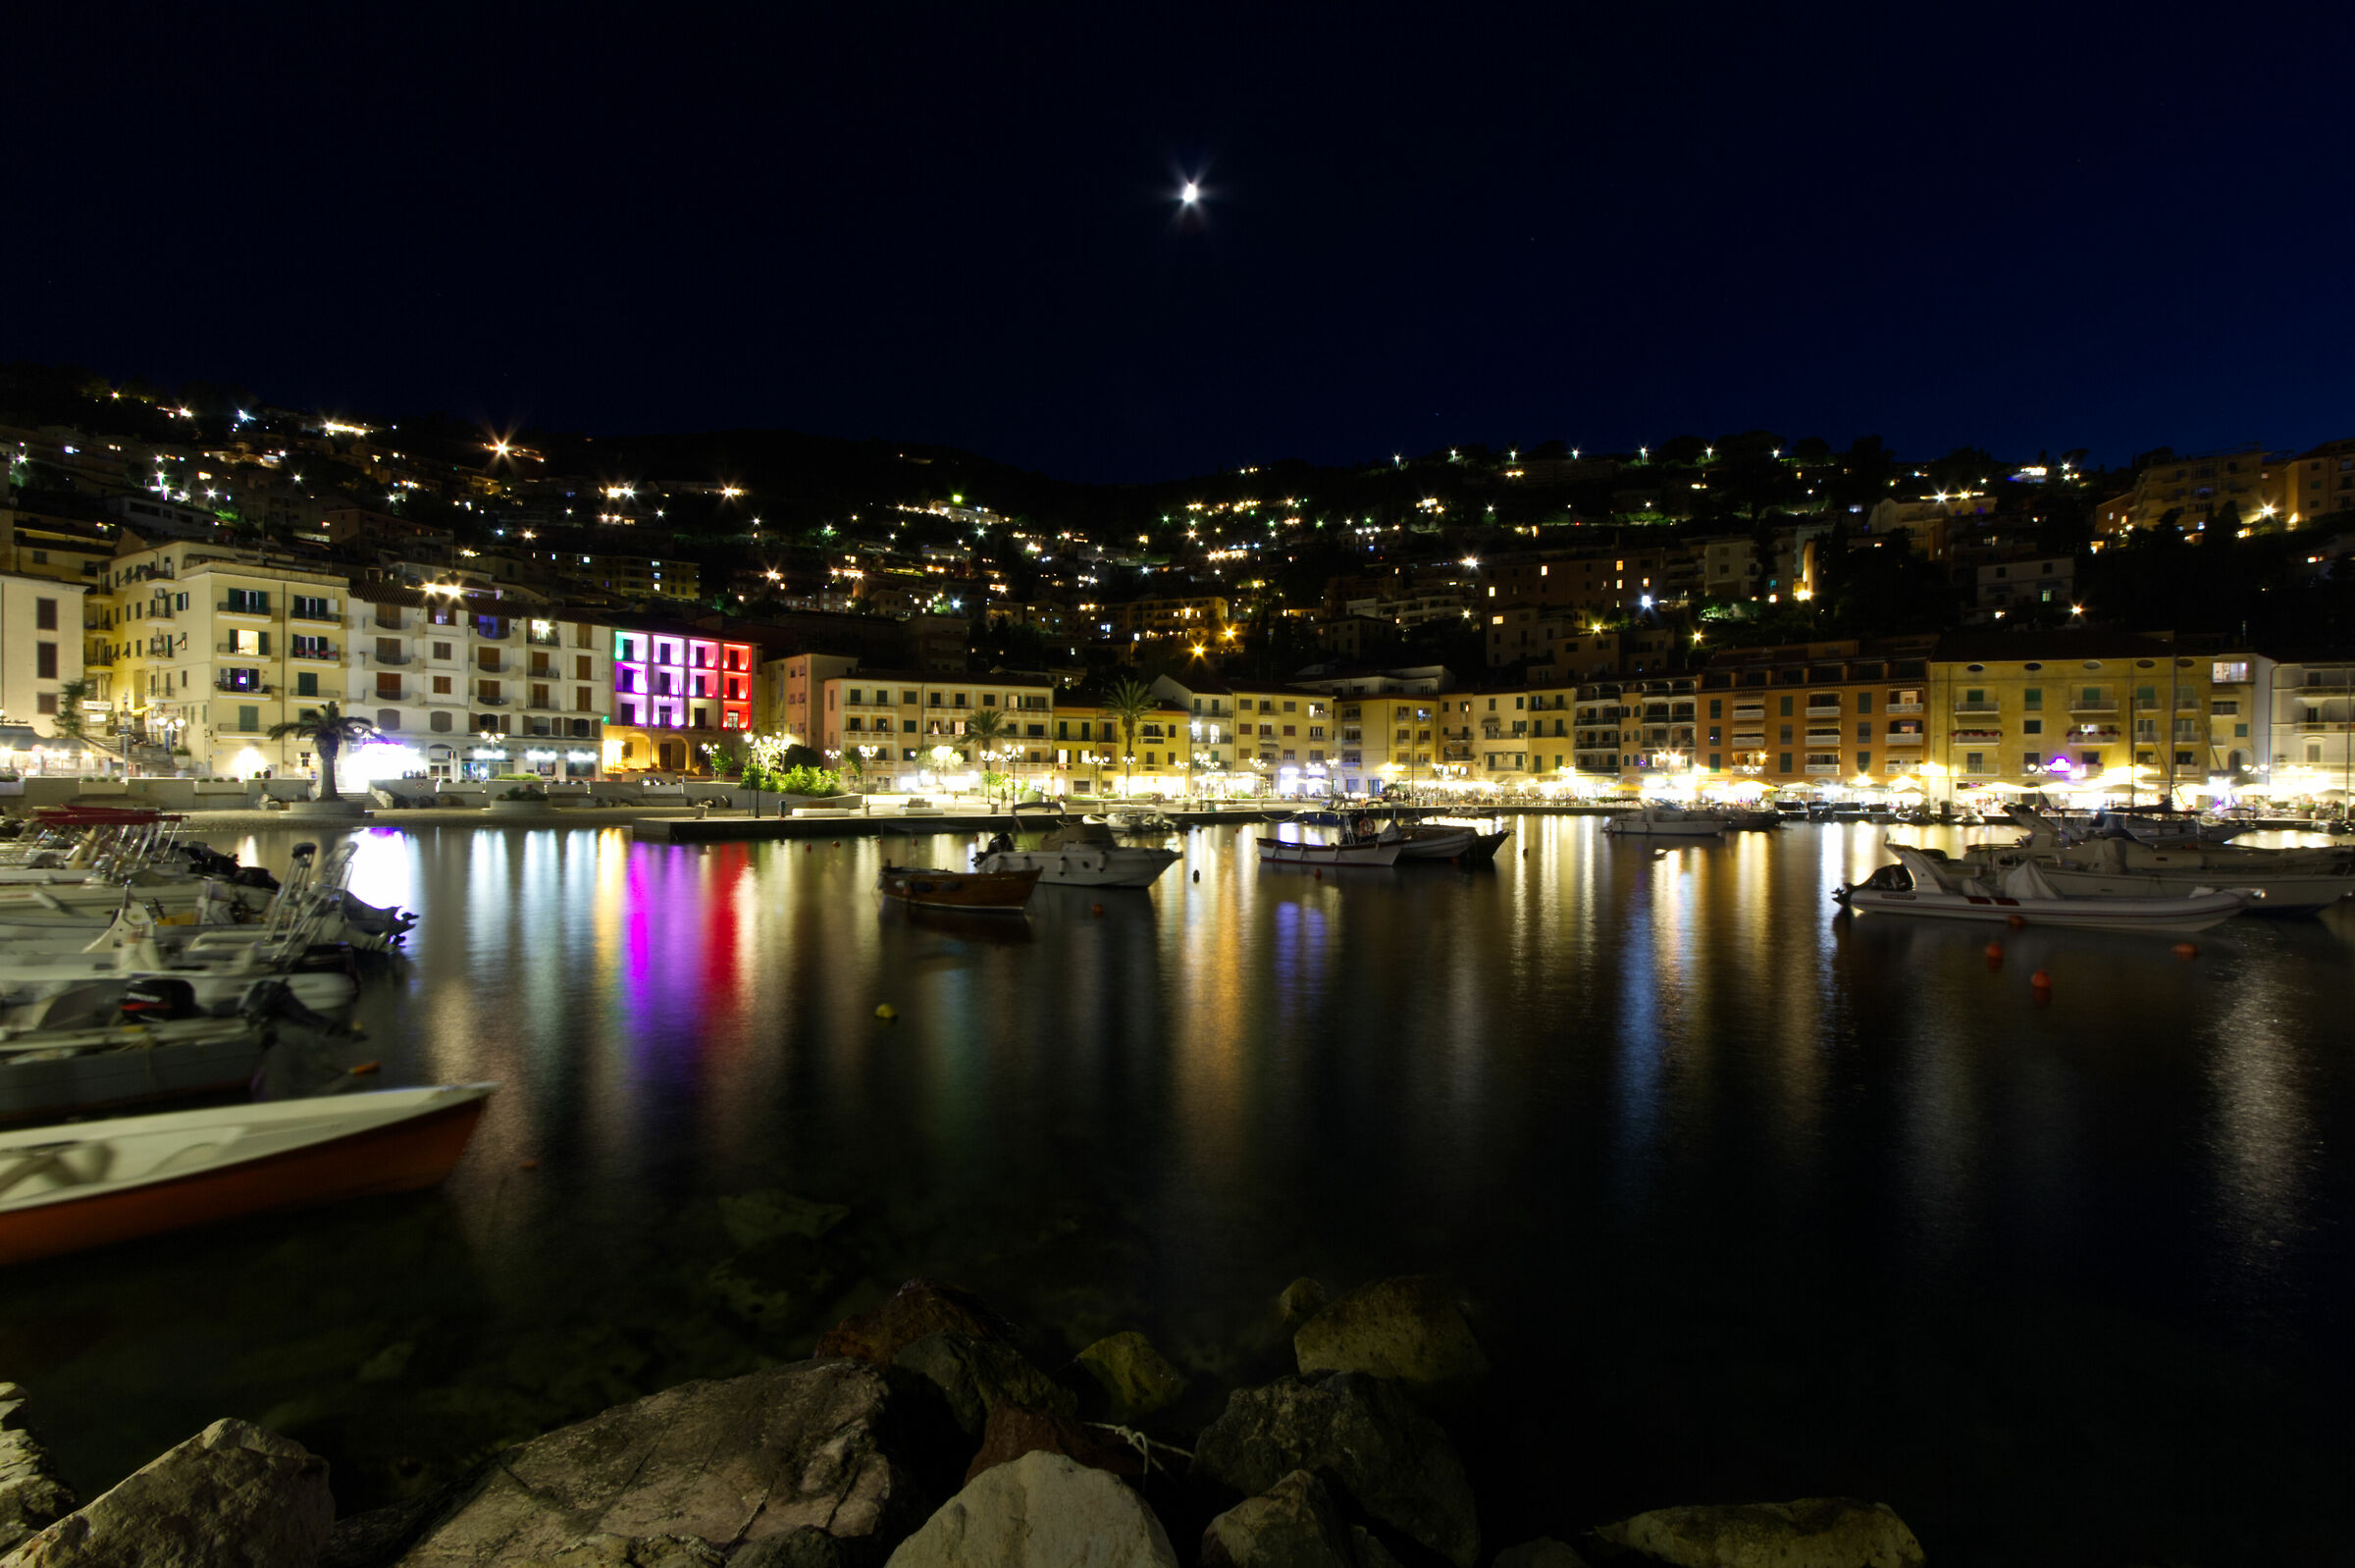 Porto S.Stefano, the port and its lights...